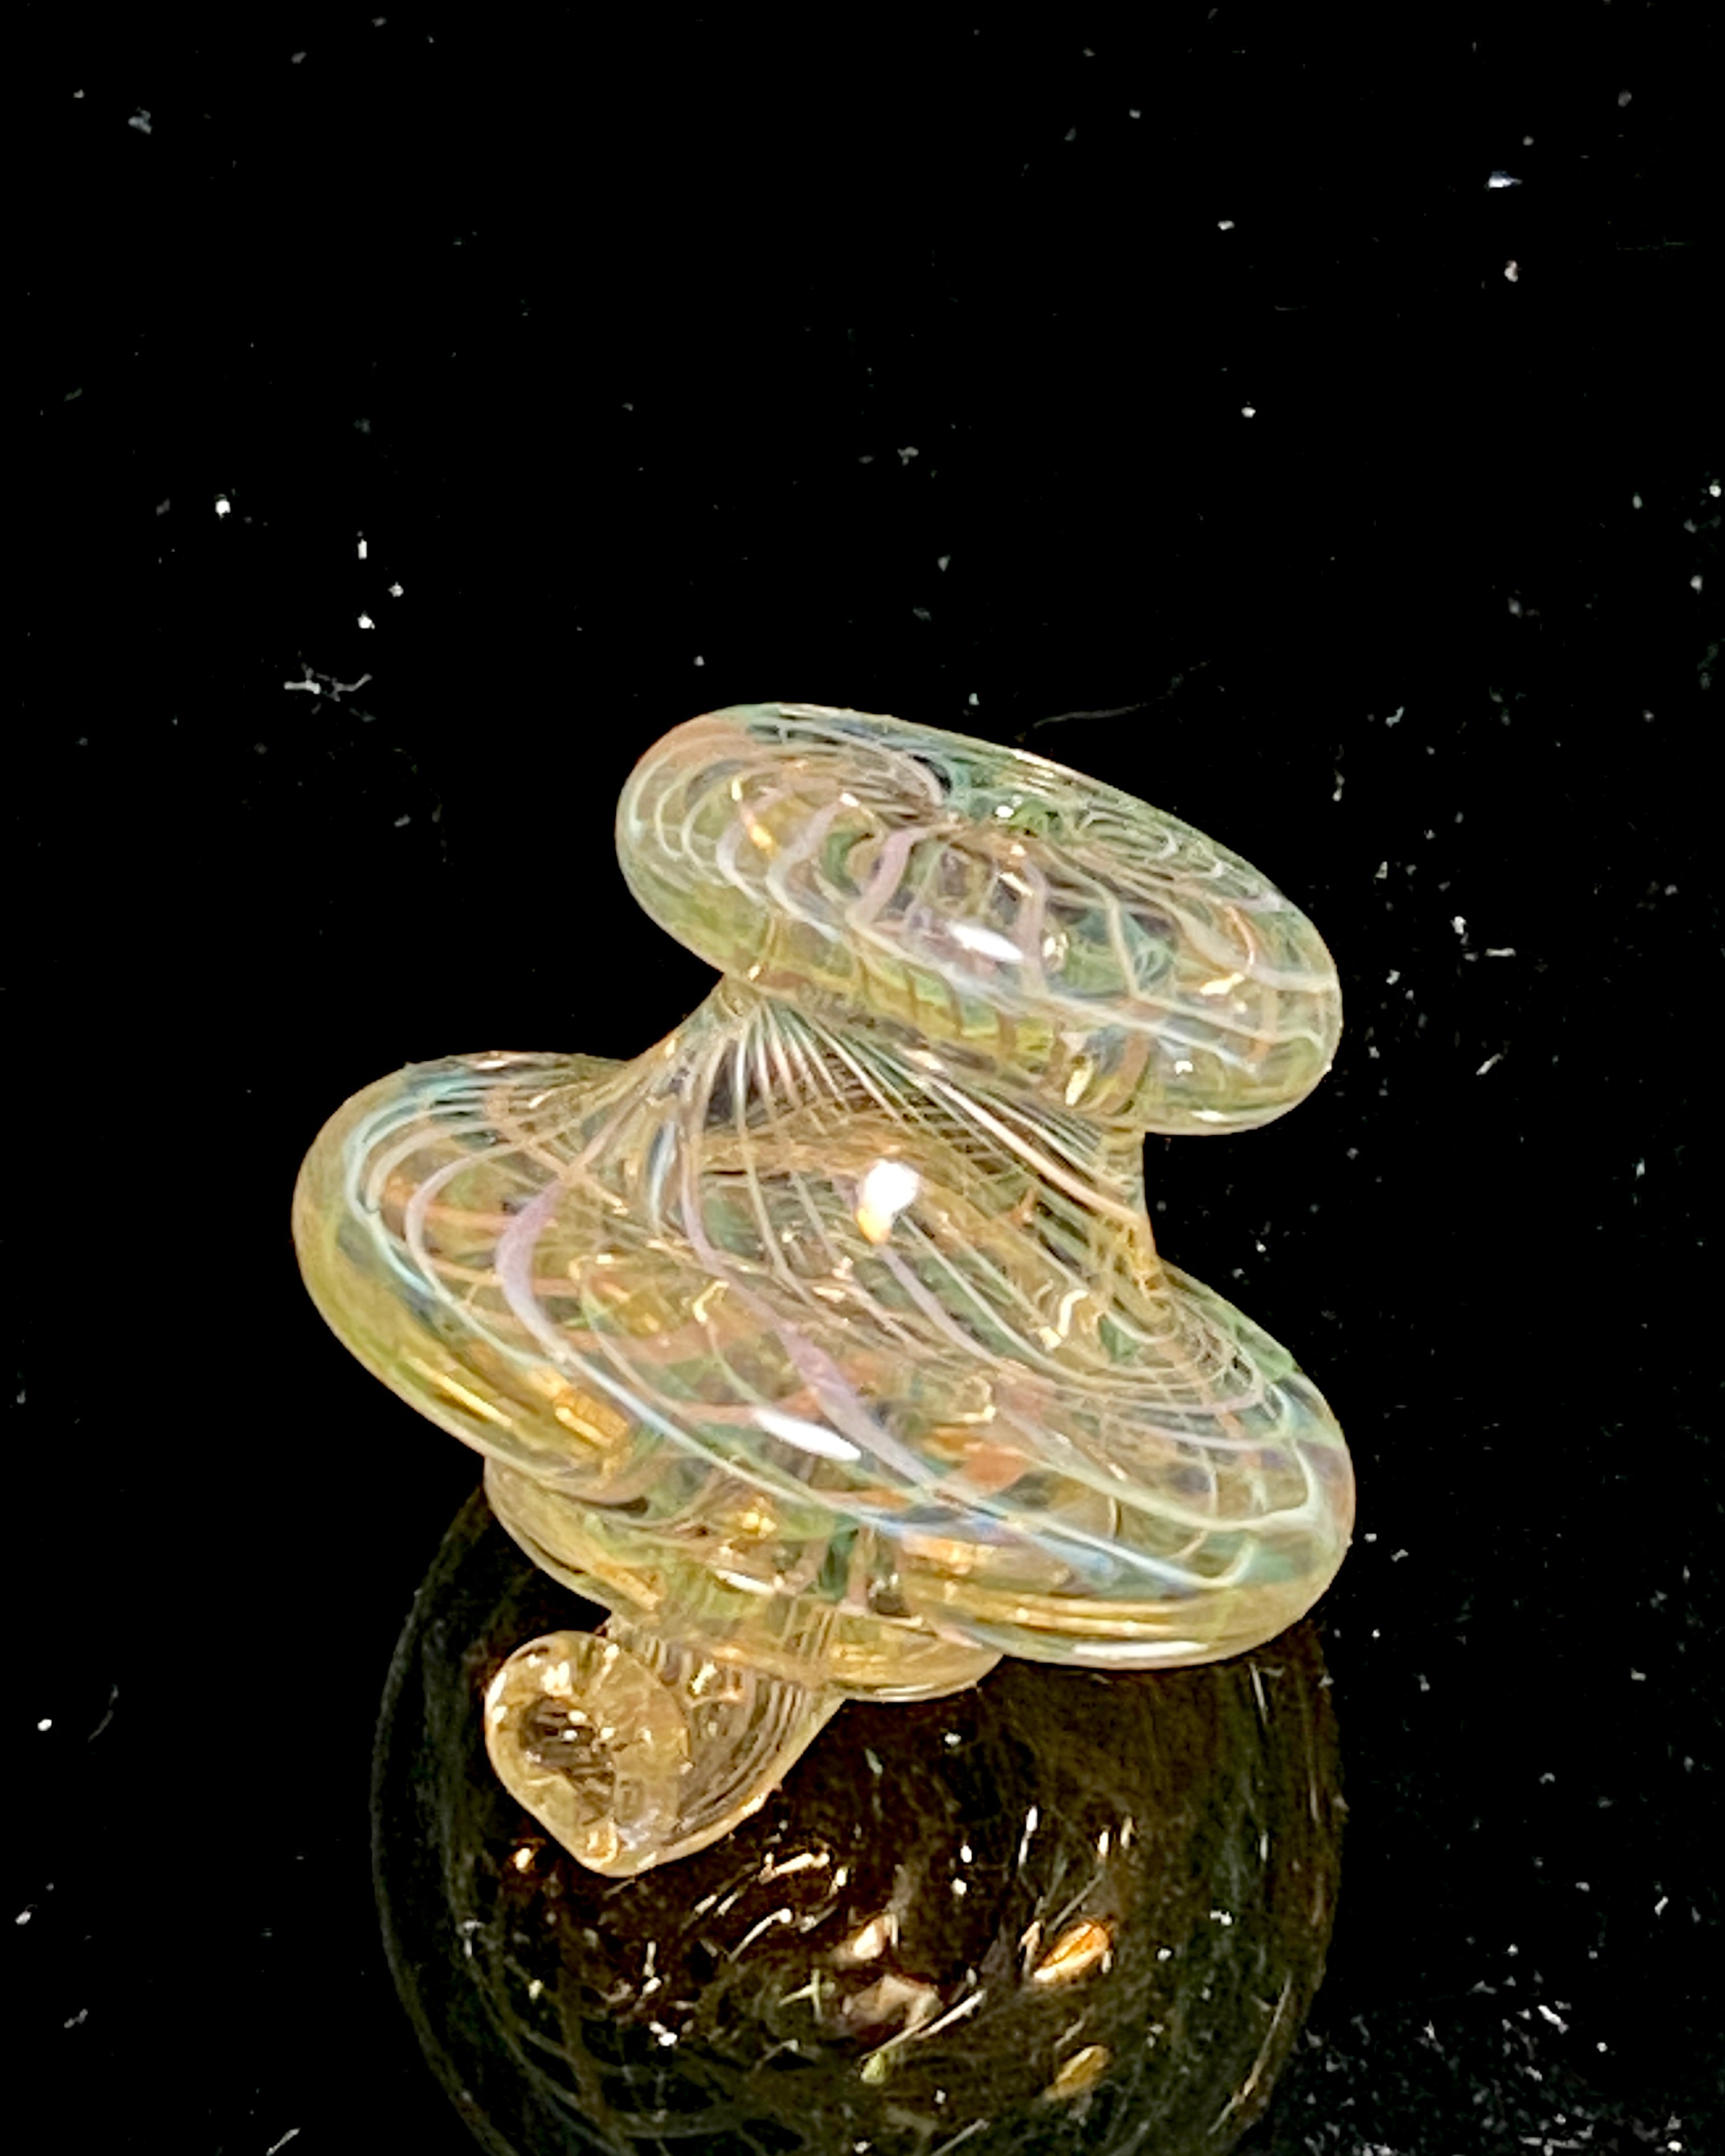 Jhanny Rise Fully Fumed Dab Cap #3 - TheSmokeyMcPotz Collection 